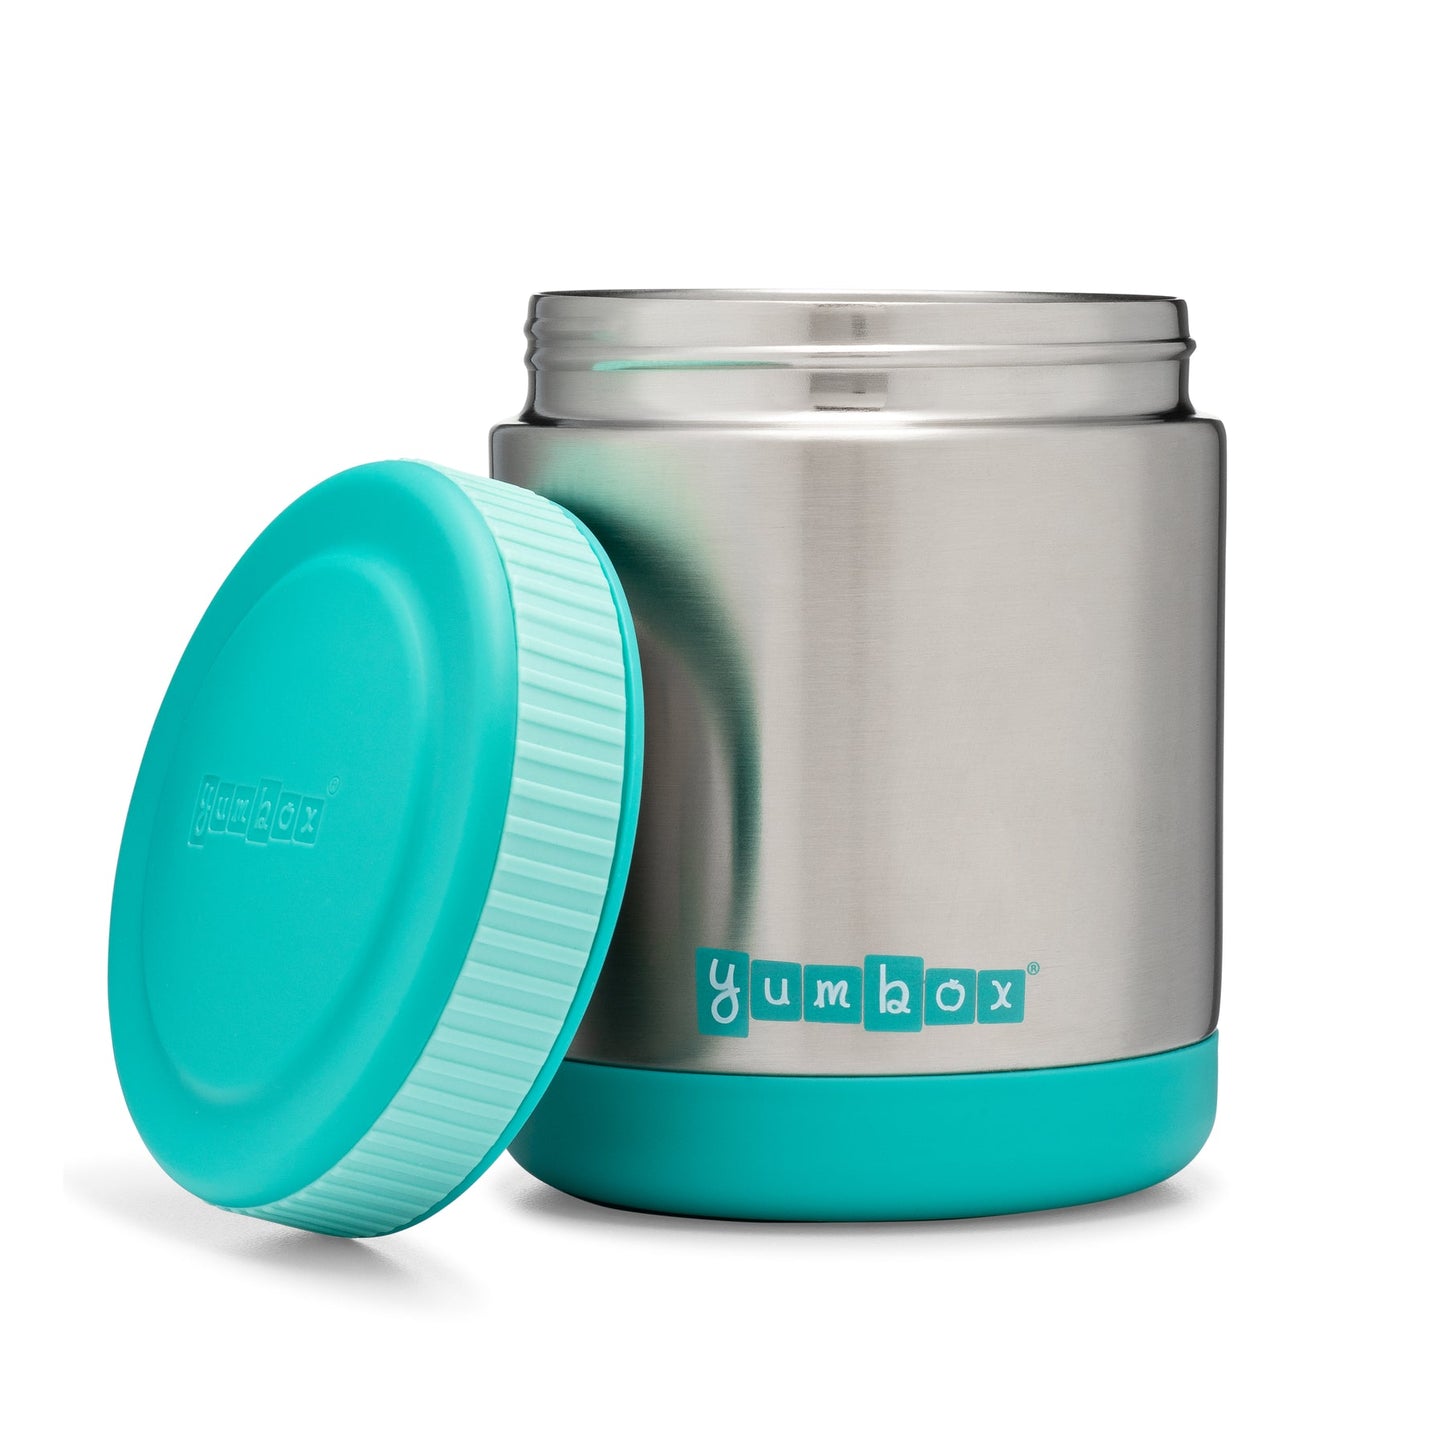 Yumbox - Zuppa Thermal Food Jar - Caicos Aqua with Band and Spoon